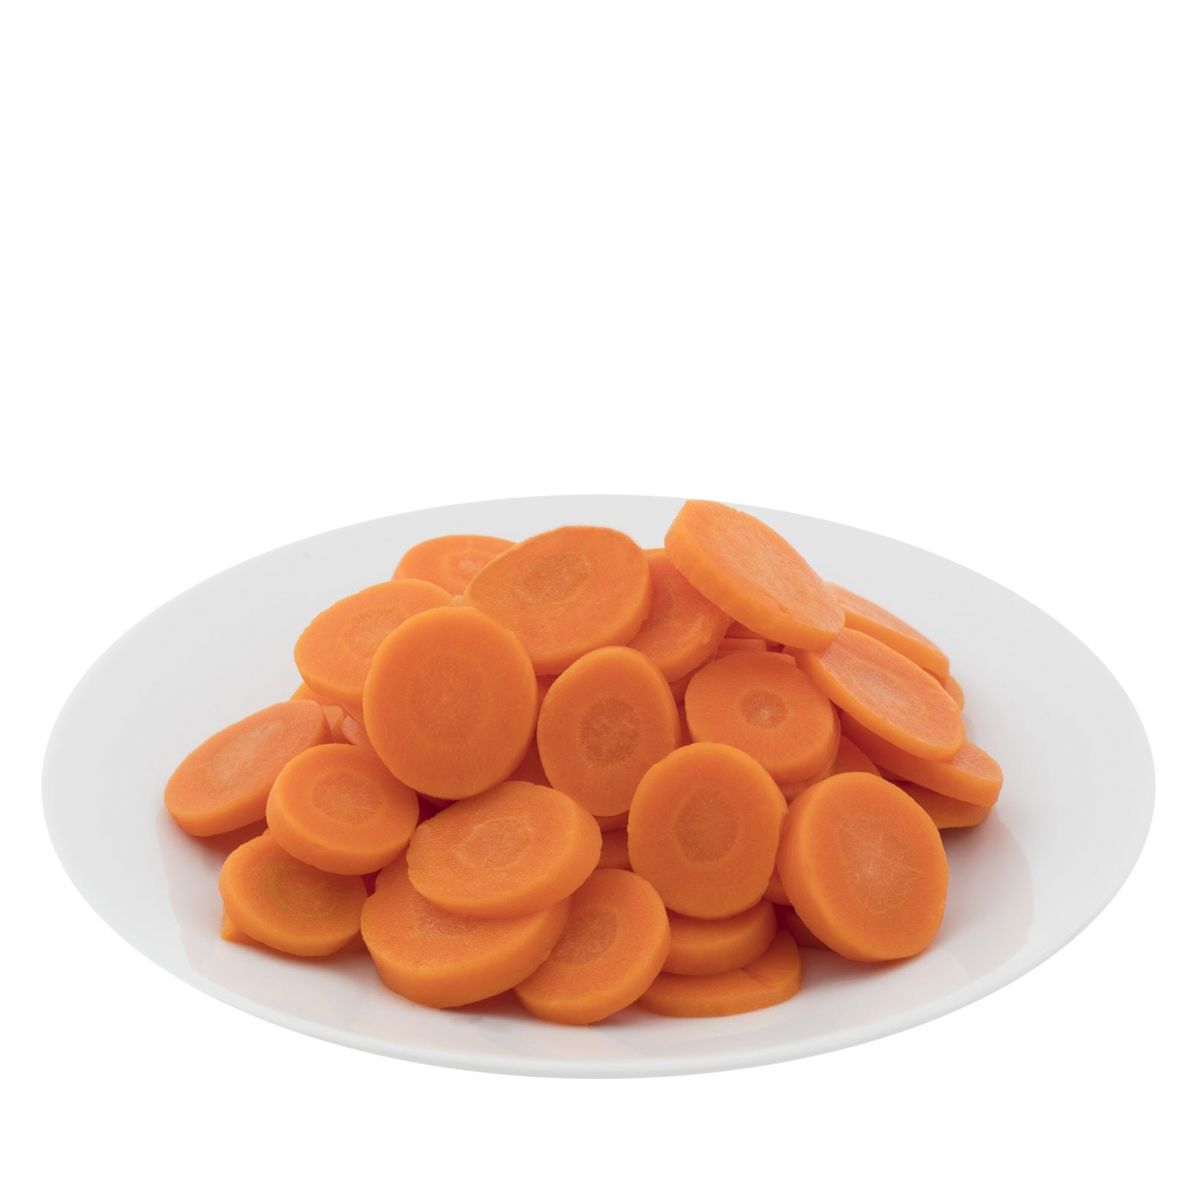 http://lavifood.com/en/products/blanching/carrot